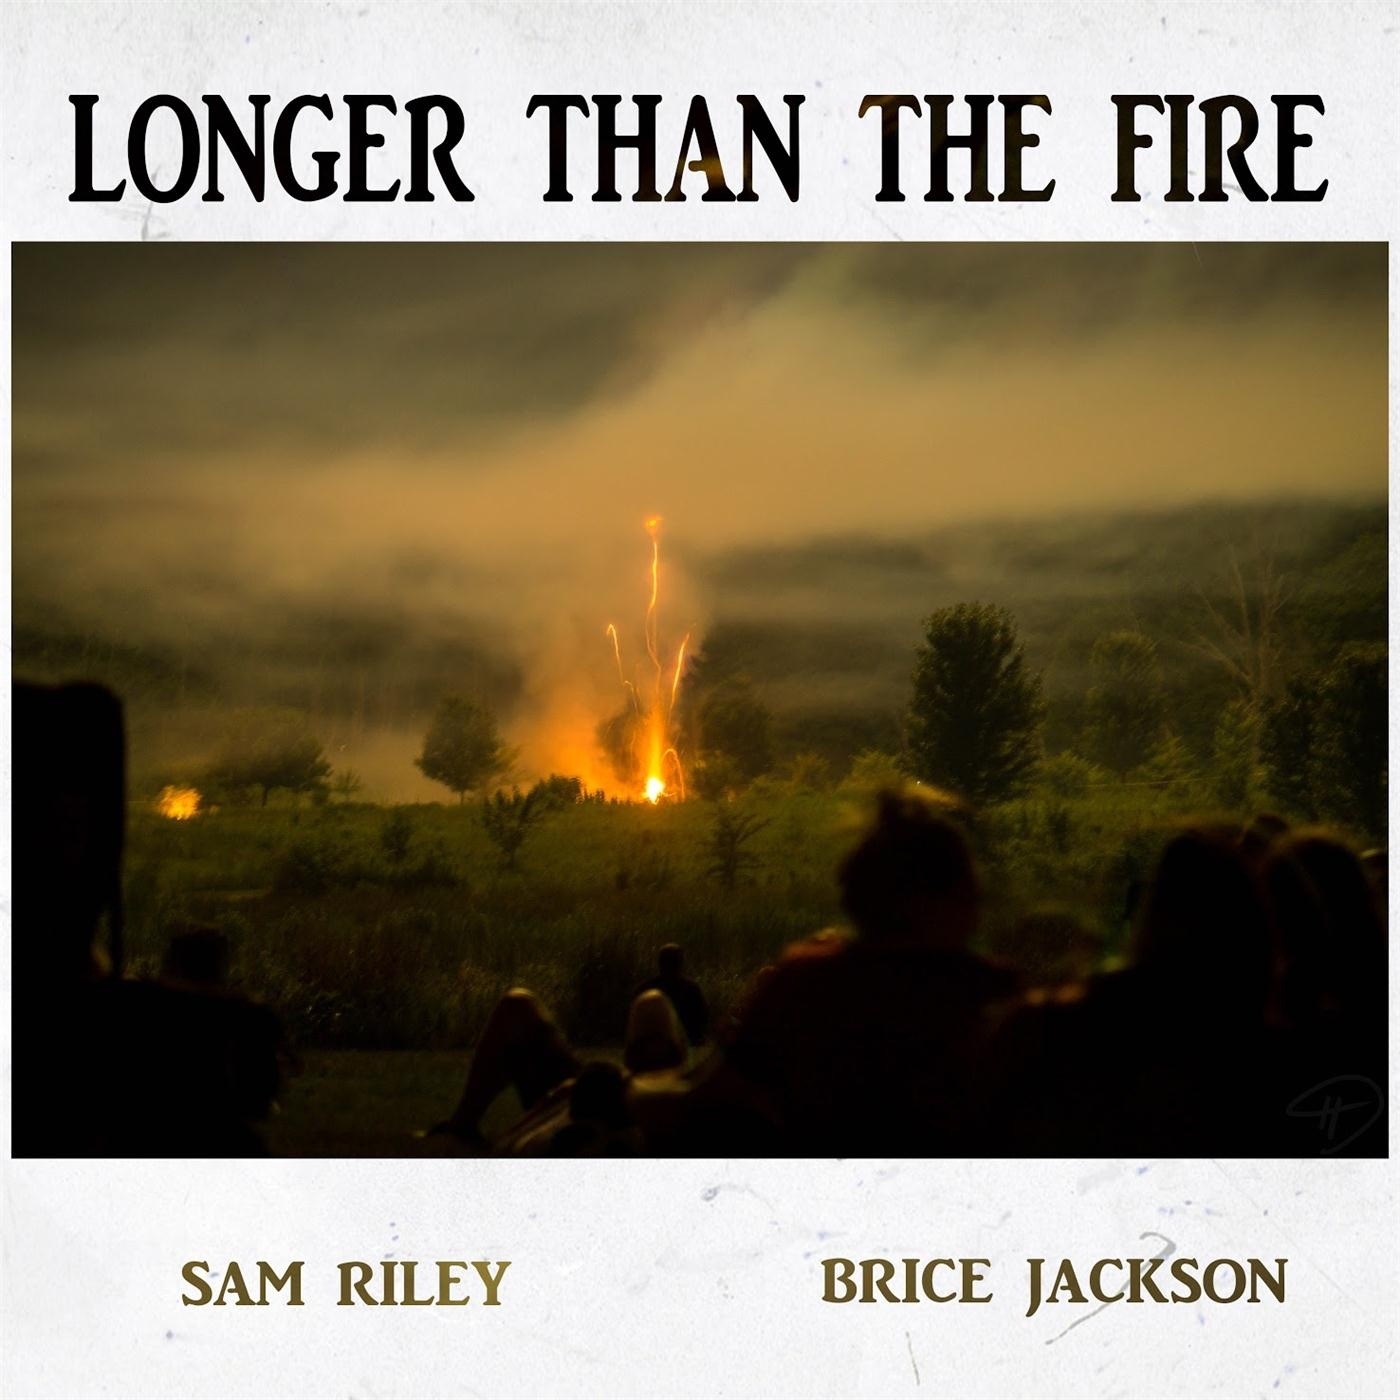 Longer Than the Fire by Sam Riley, Brice Jackson